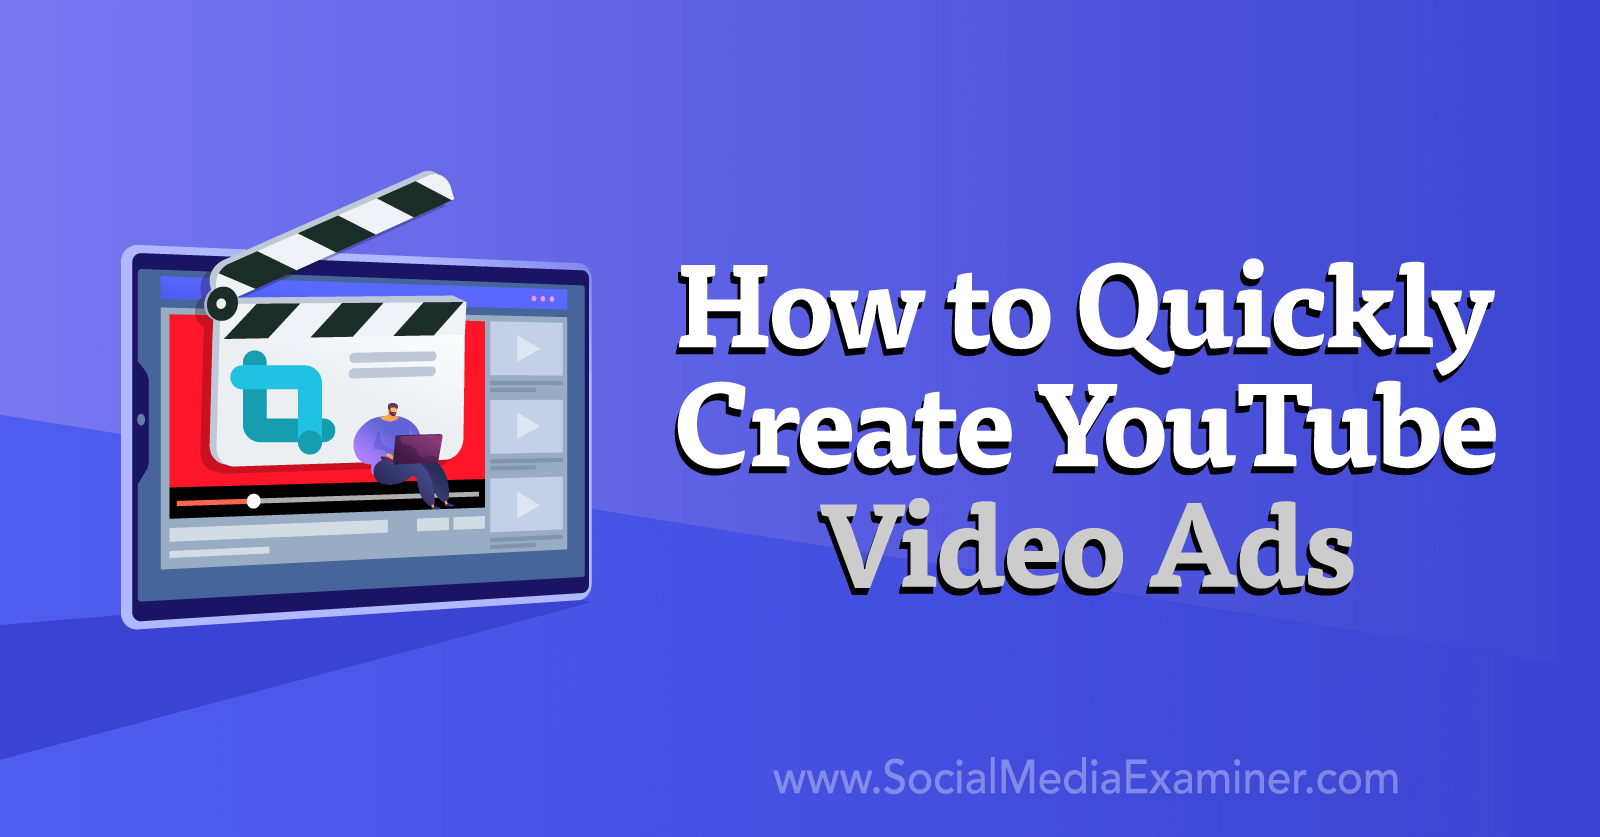 How to Create YouTube Video Ads Quickly by Social Media Examiner